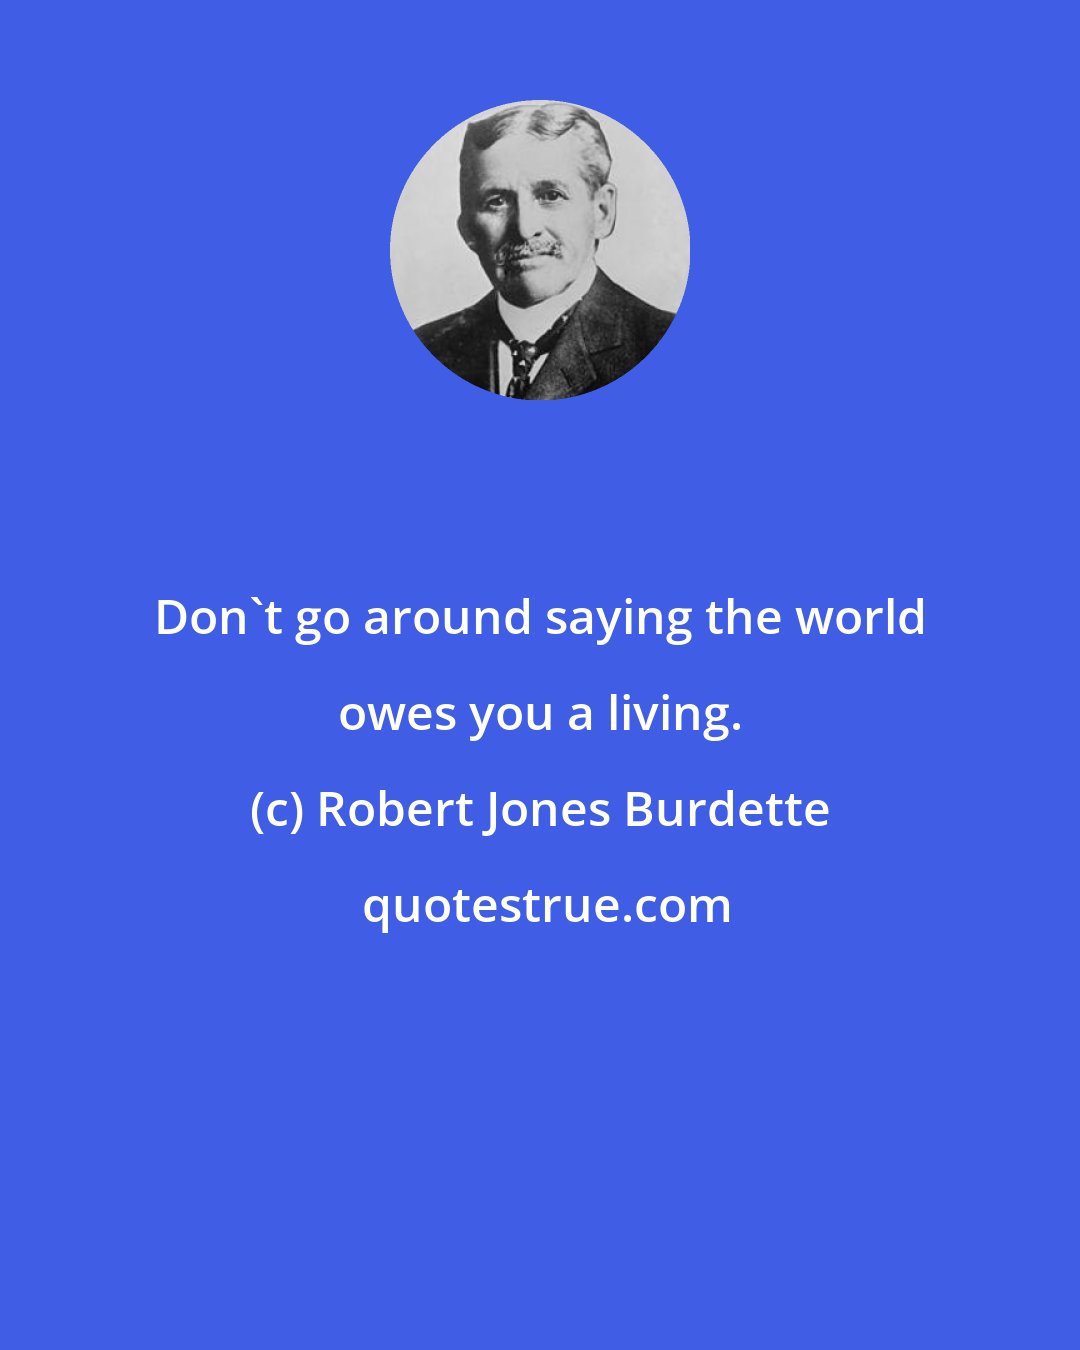 Robert Jones Burdette: Don't go around saying the world owes you a living.